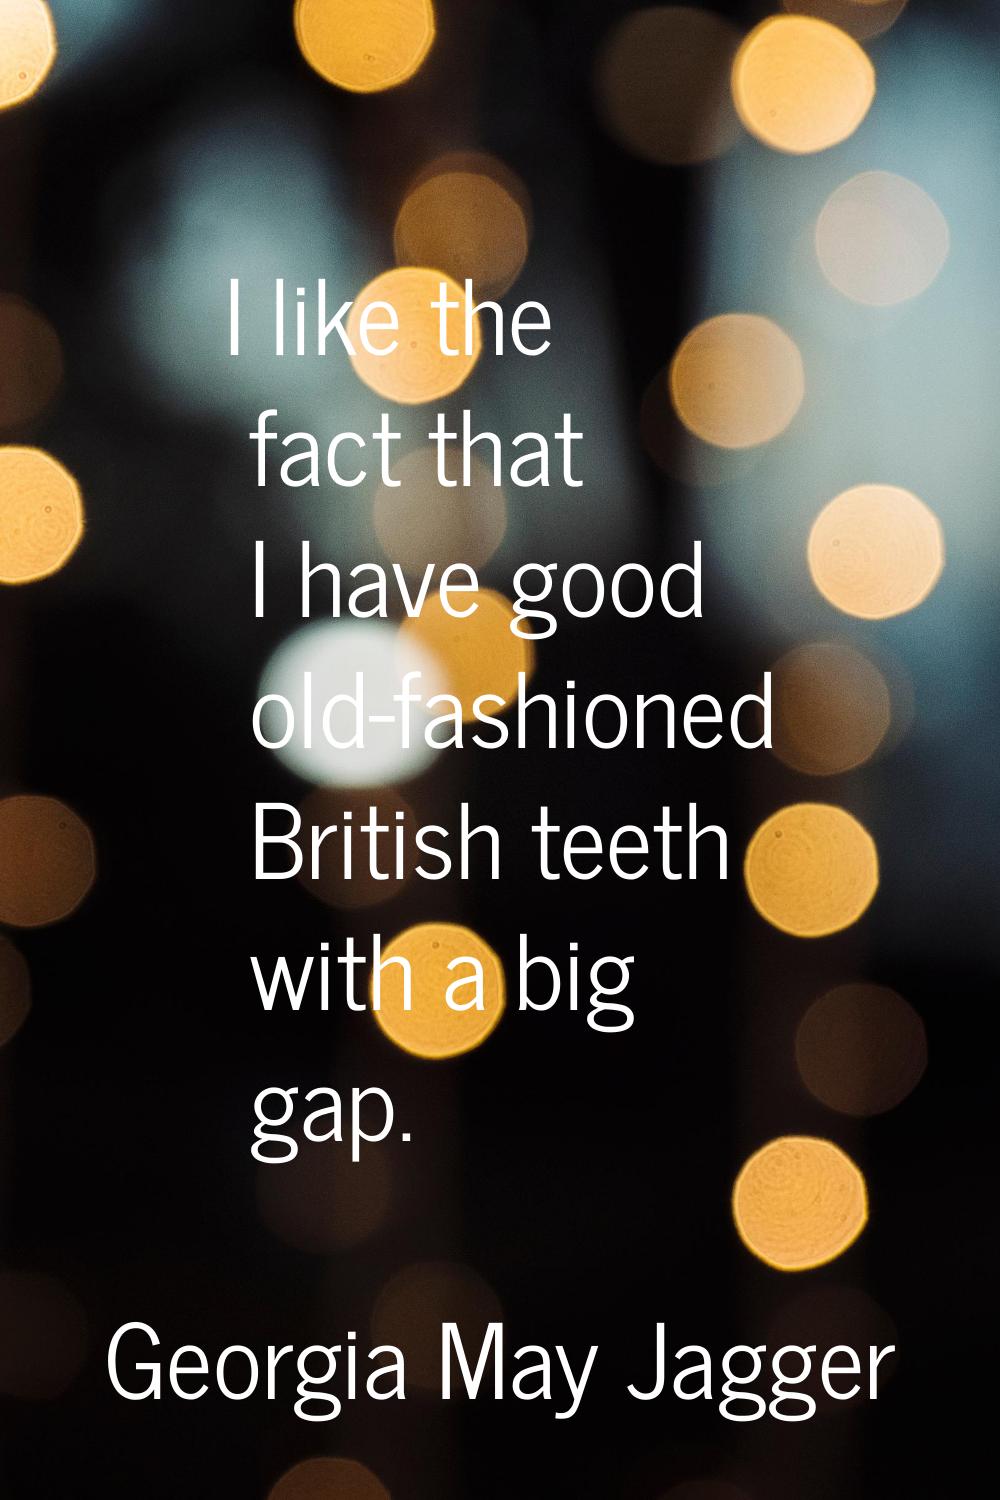 I like the fact that I have good old-fashioned British teeth with a big gap.